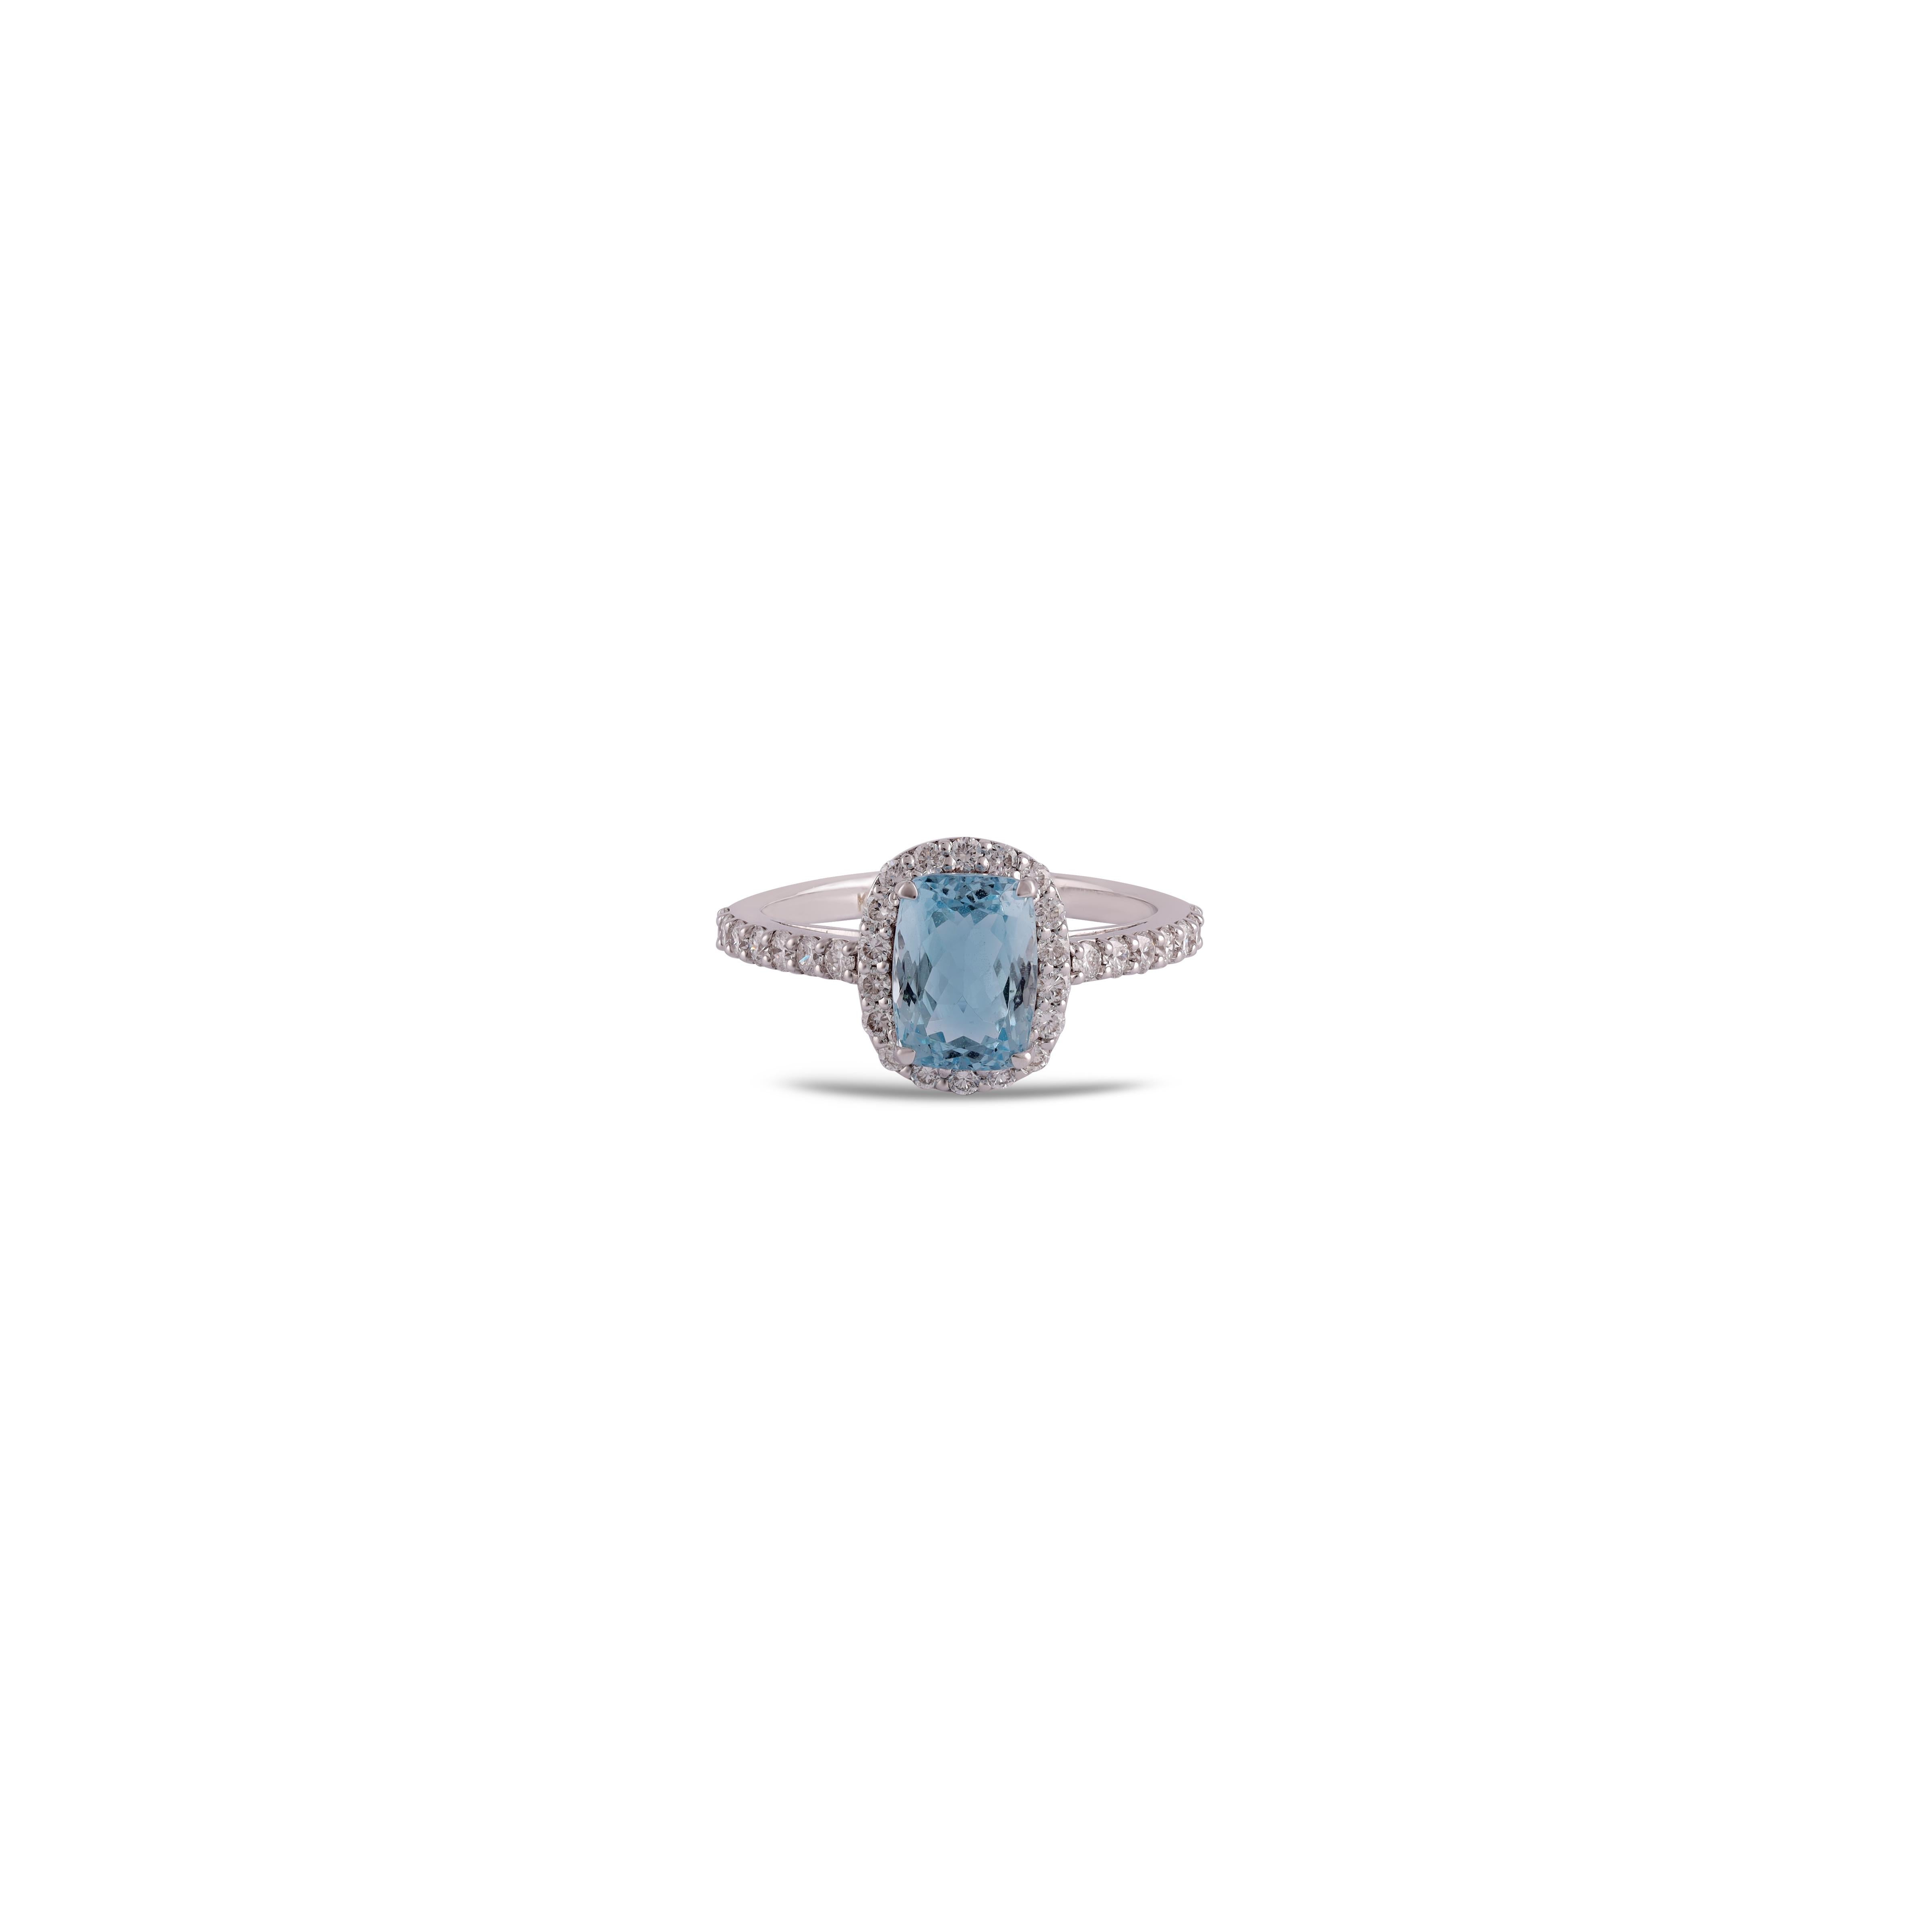 This is an elegant Aquamarine & Diamond ring studded in 18k White gold features a fine quality of  Aquamarine 1.64 carats with  Diamond 0.53 carats.
This entire ring is made in 18k White gold
 It is a classic ring.  
Custom Services
Resizing is